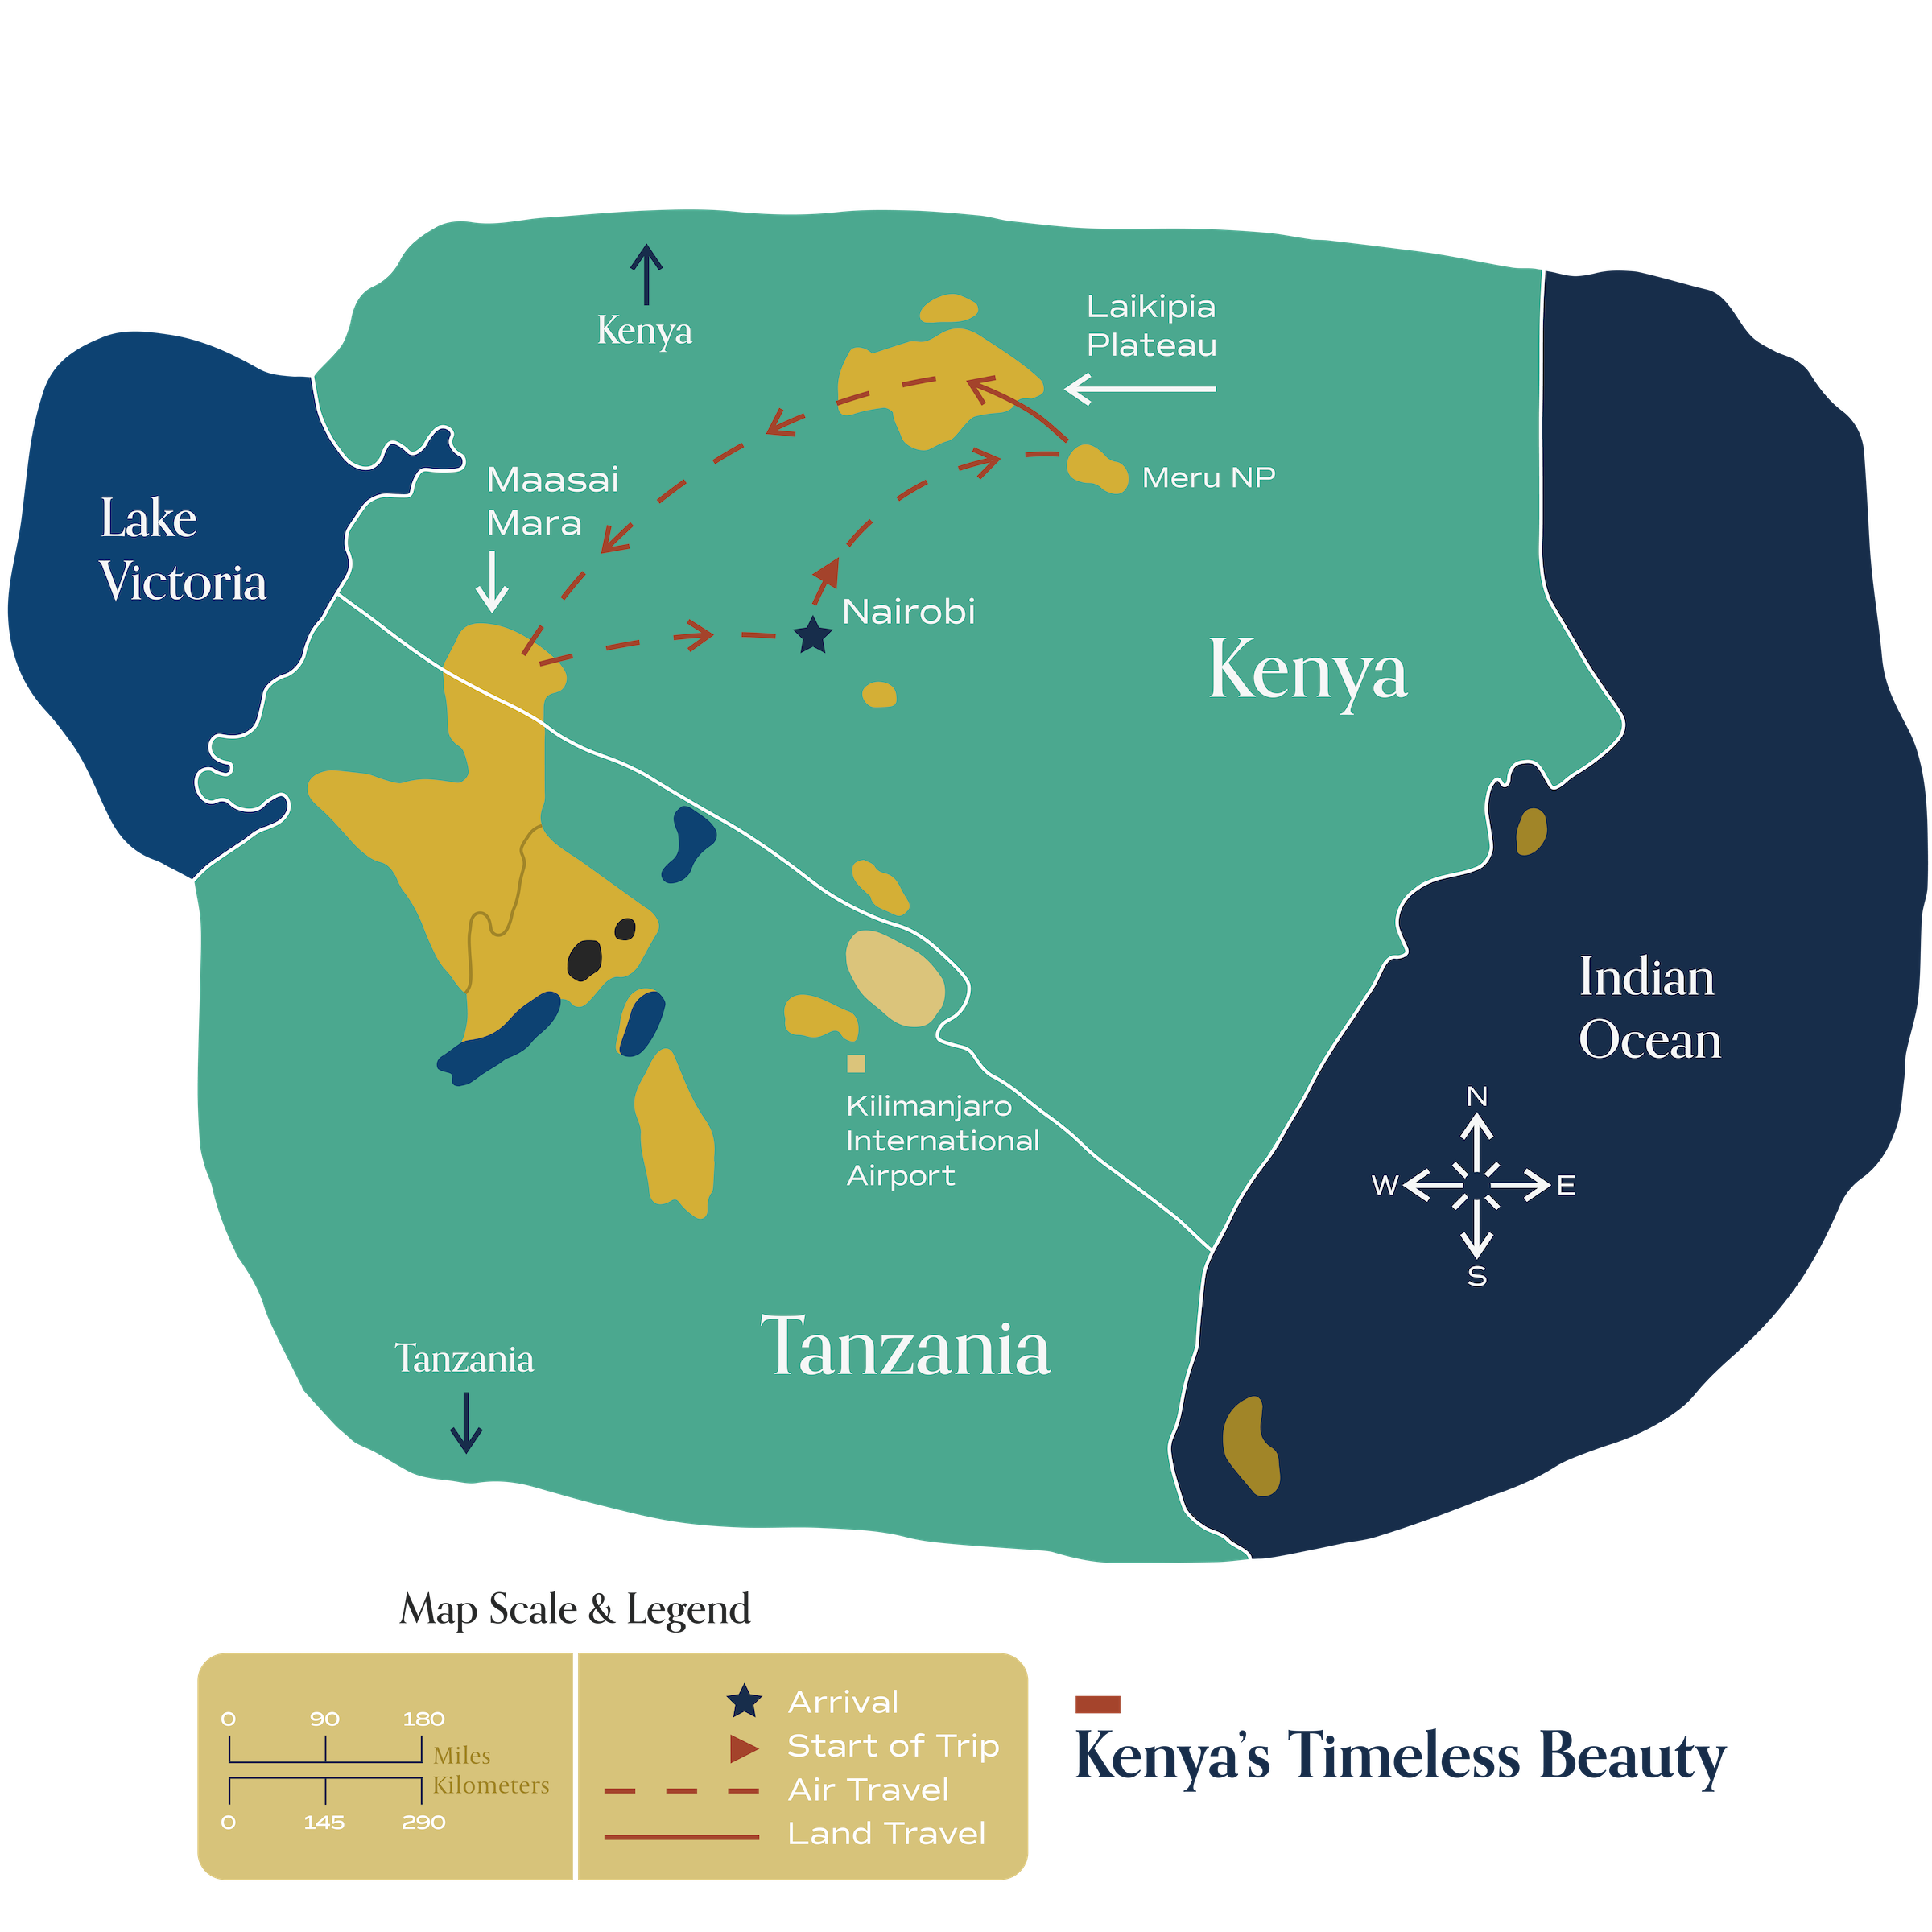 This map visually depicts Metamo's "Kenya's Timeless Beauty" journey.